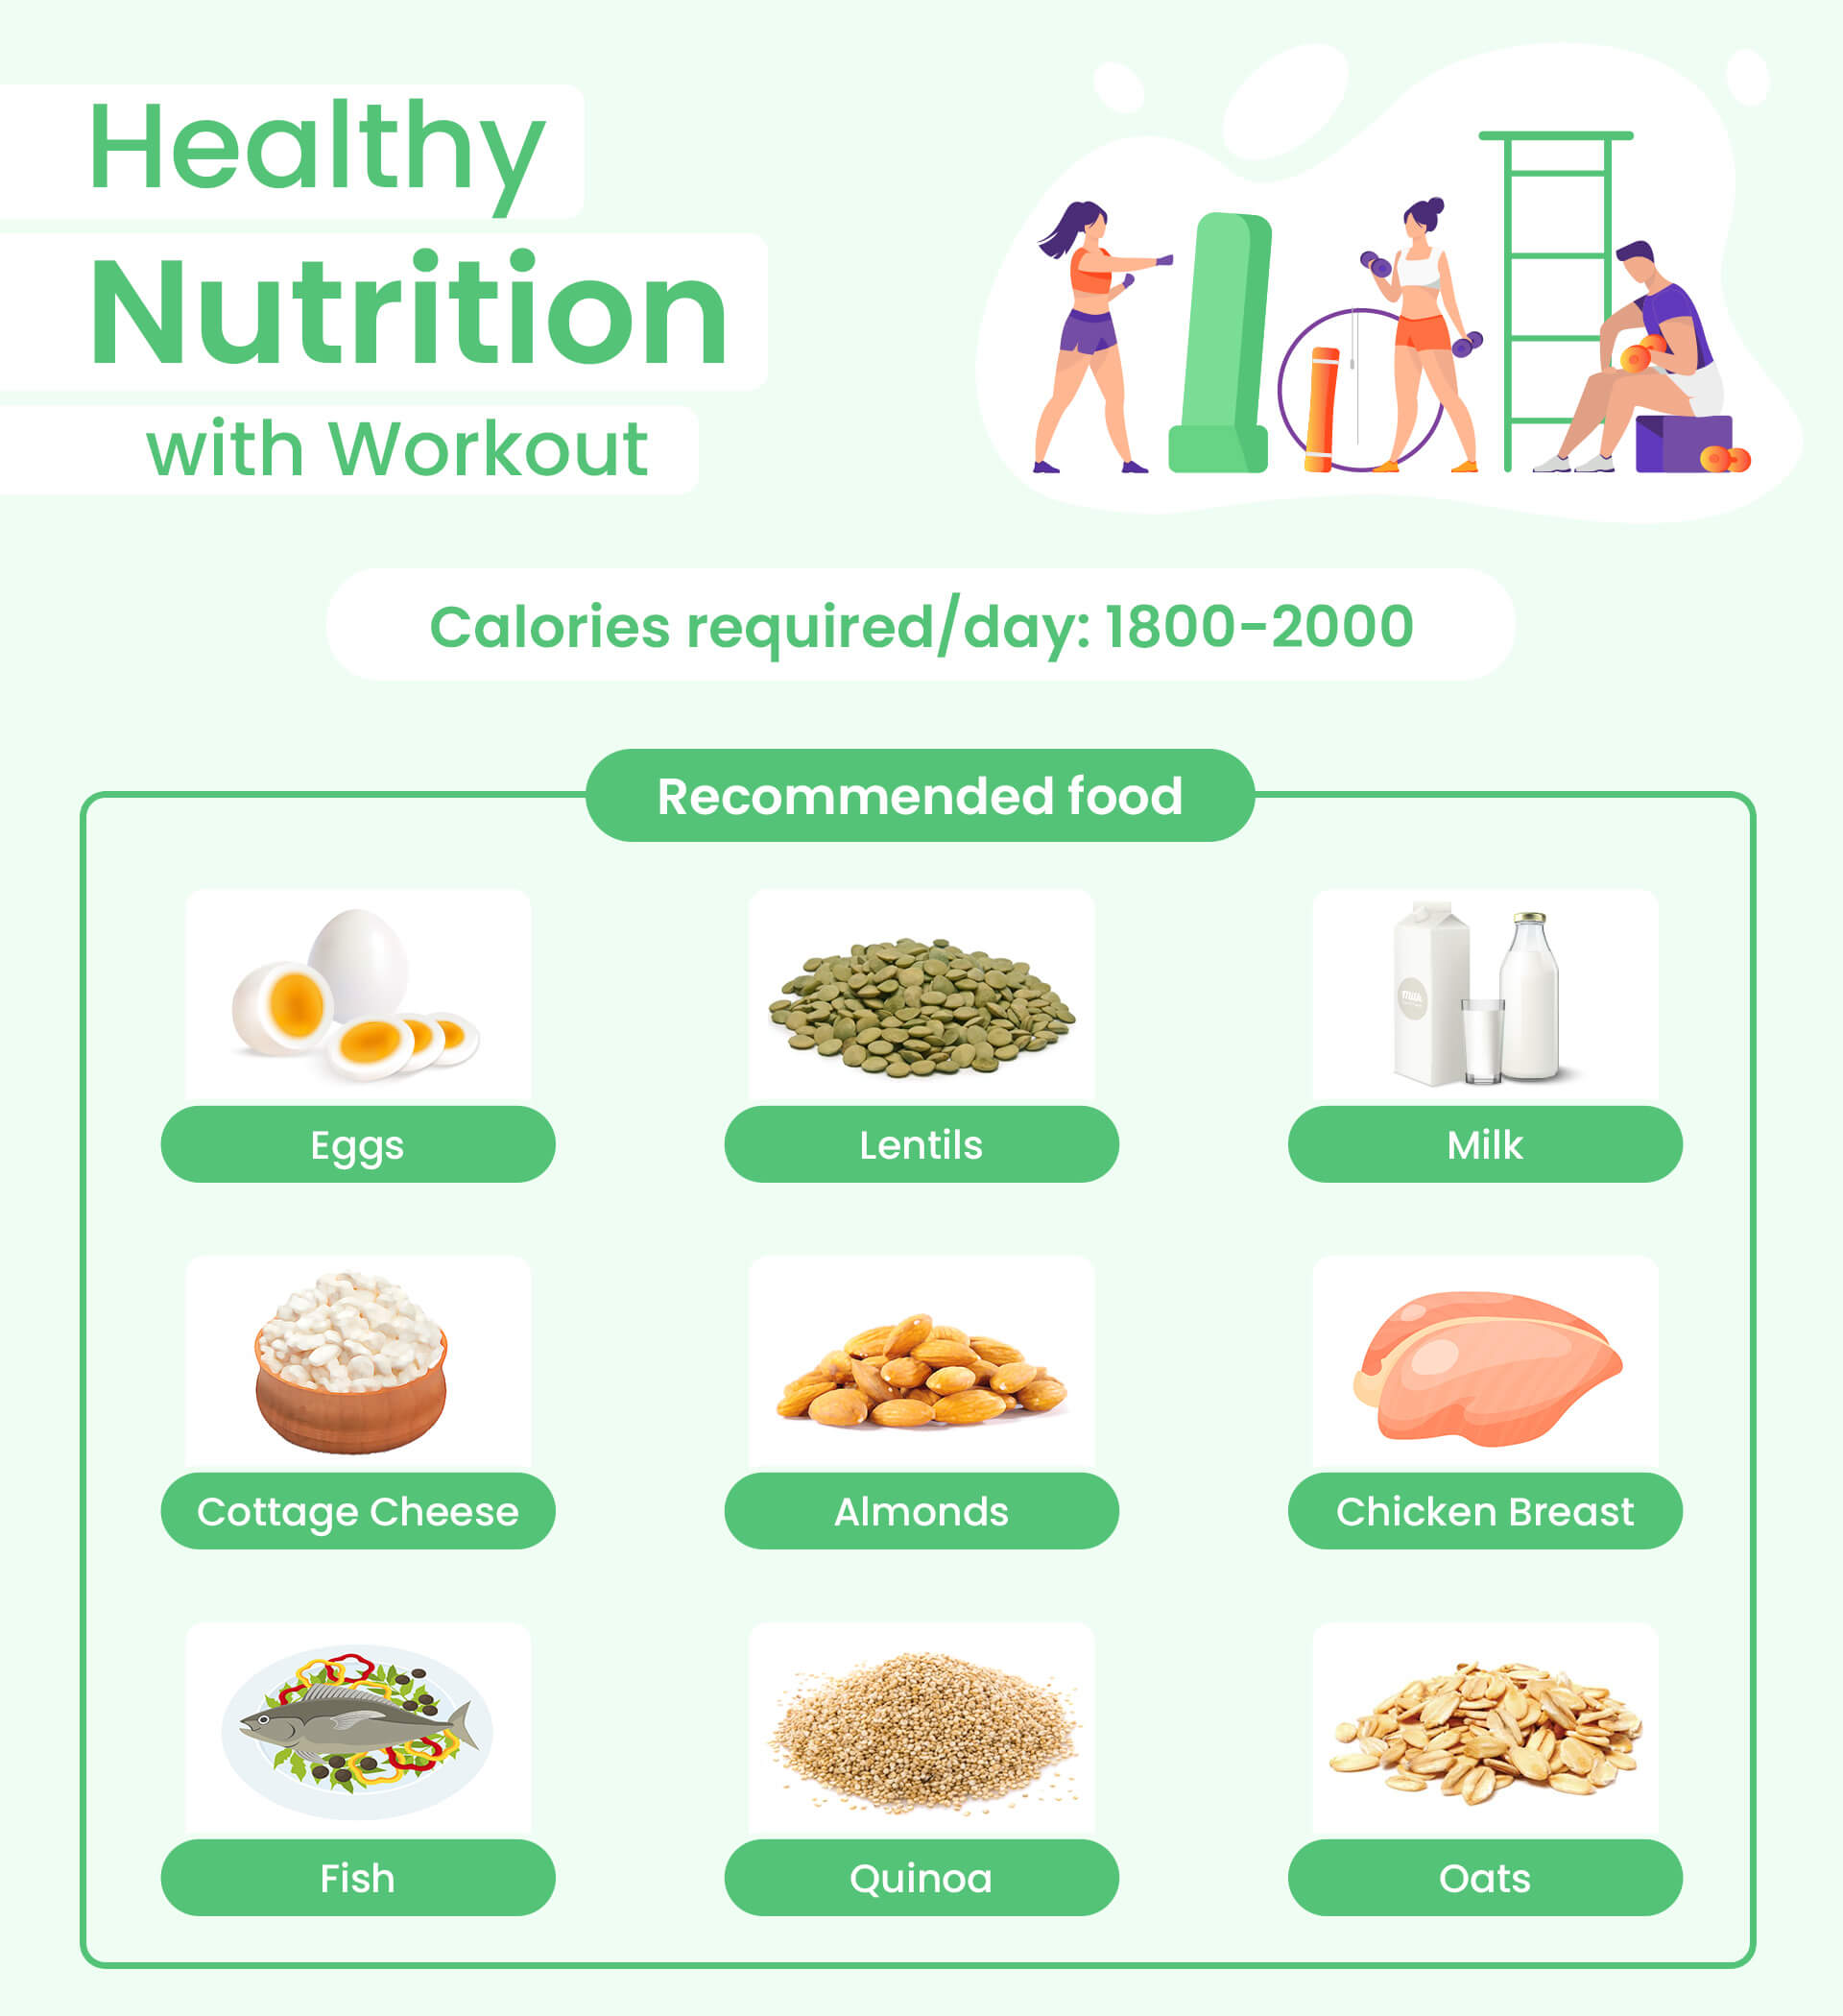 Healthy Nutrition with Workout